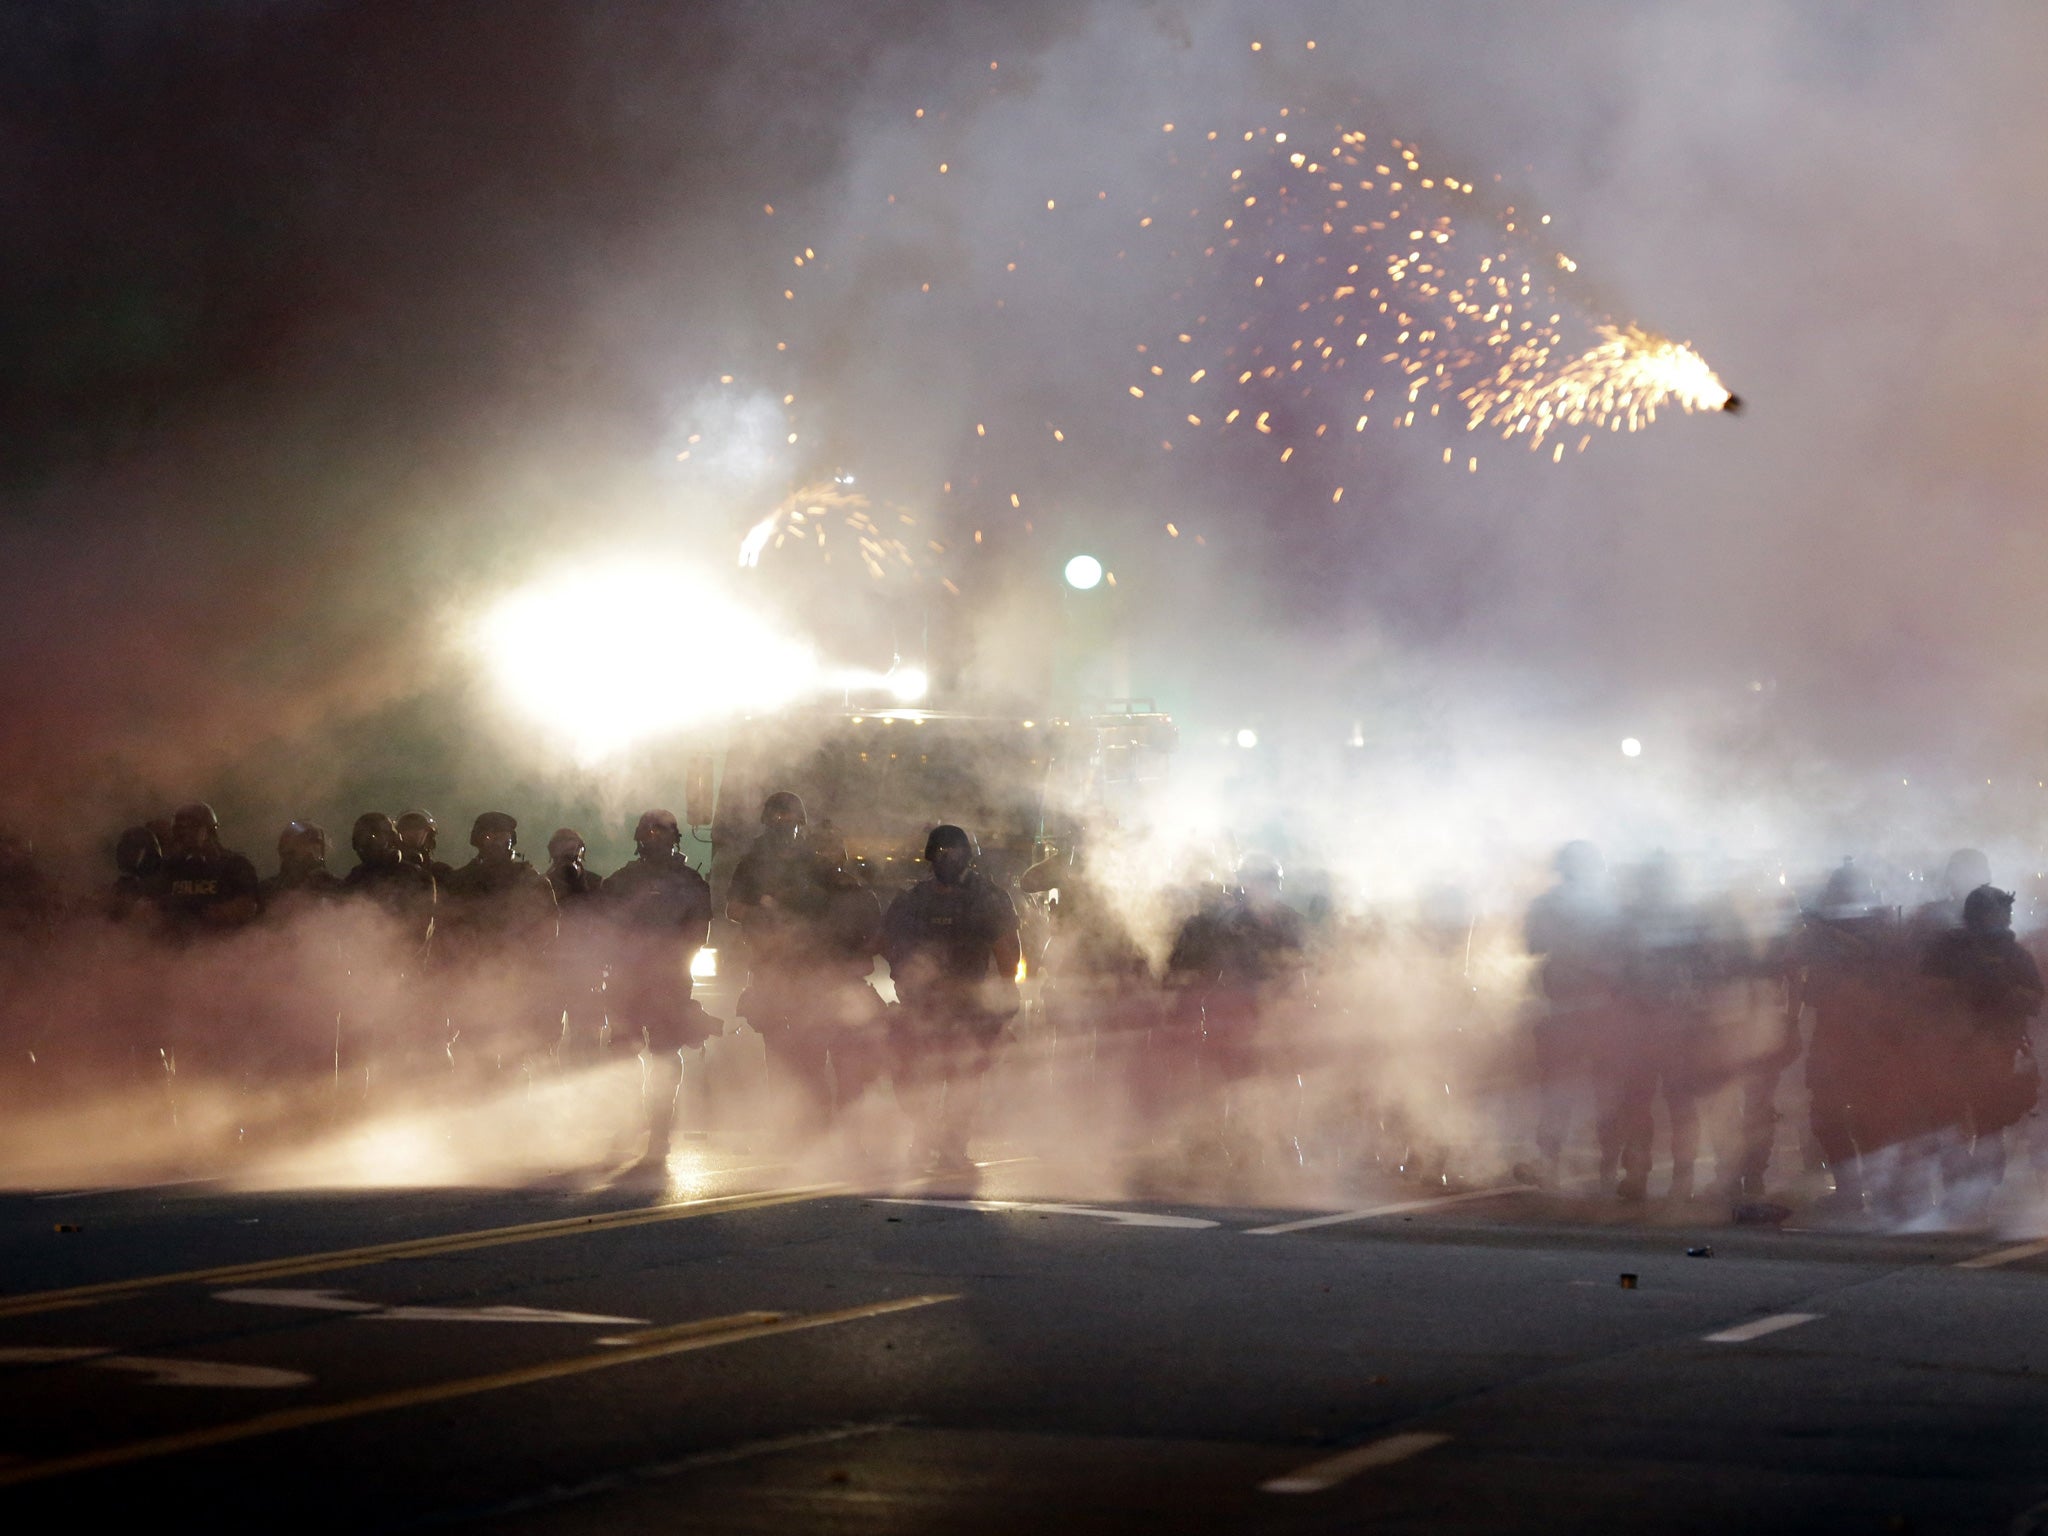 An explosive device deployed by police flies in the air as police and protesters clash Wednesday, Aug. 13, 2014, in Ferguson